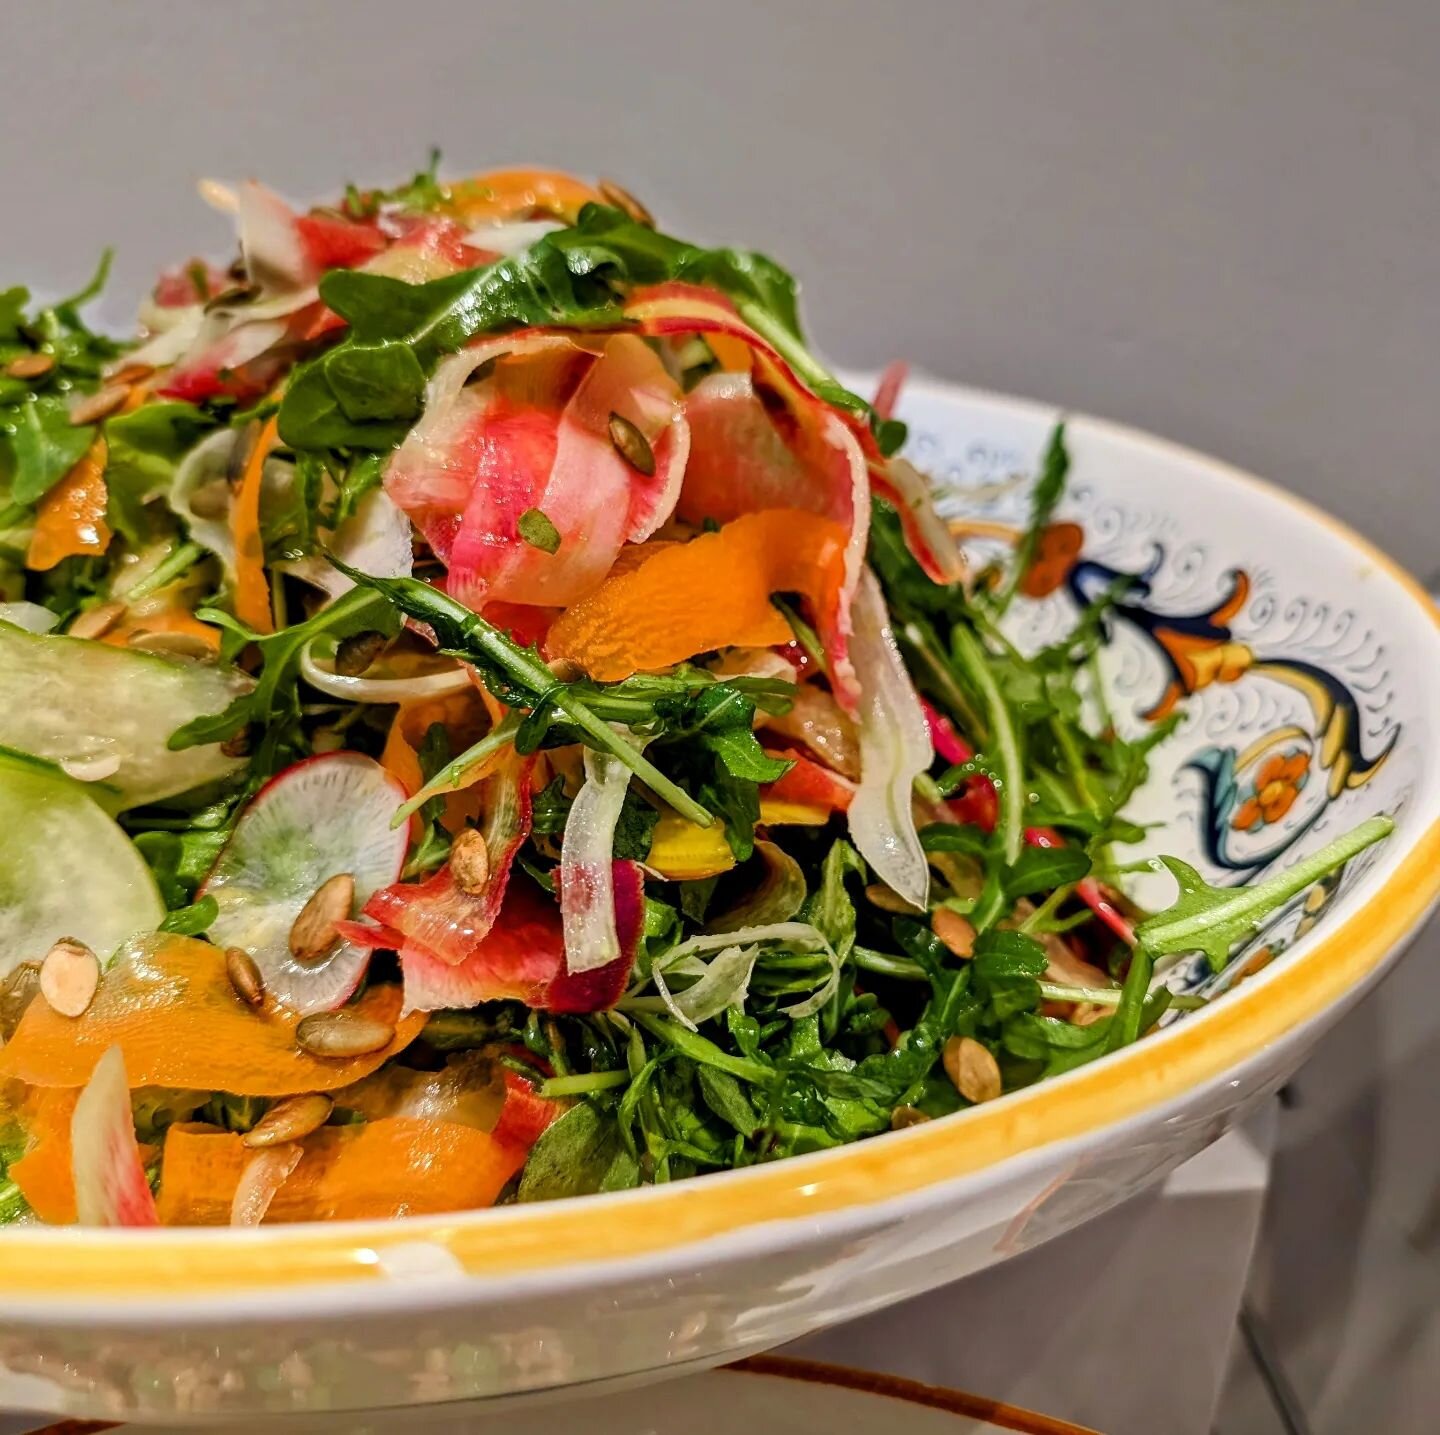 Shaved market veggie salad! All the colors, lots of crunch.